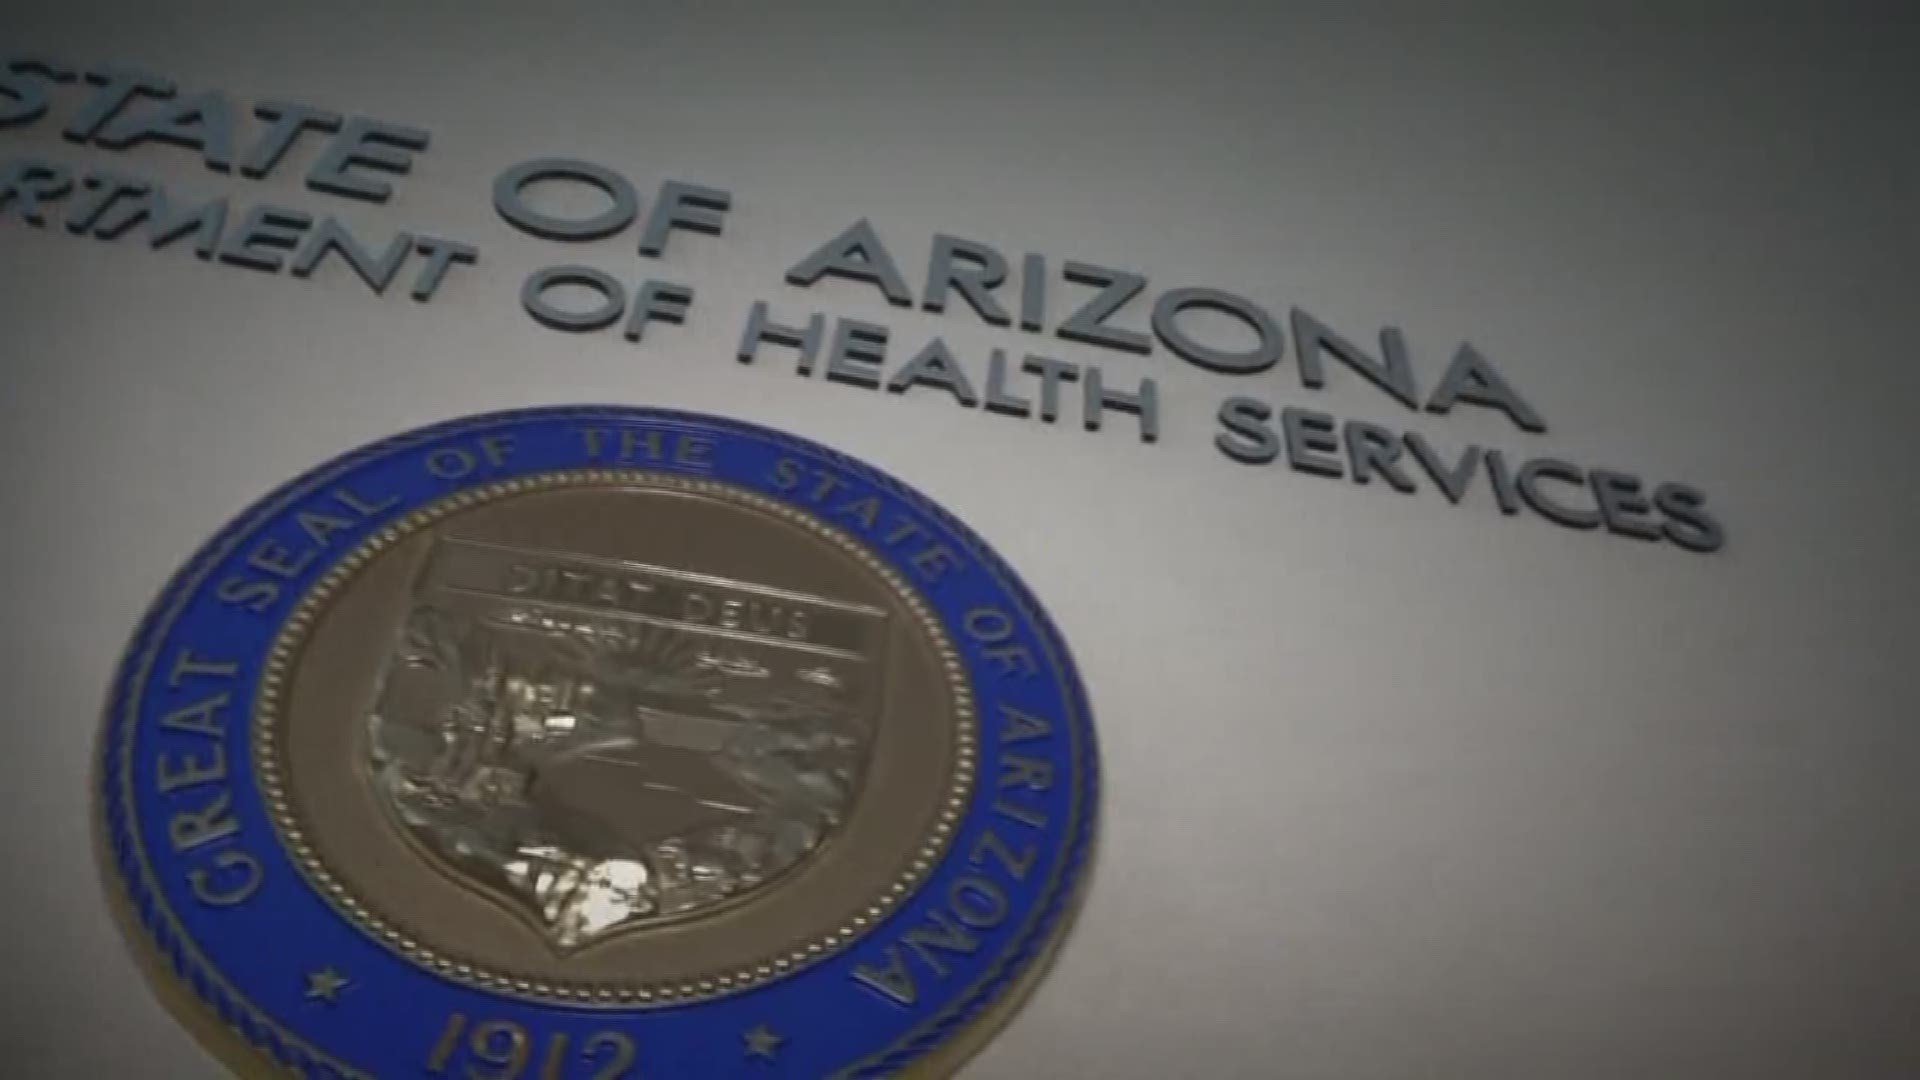 The Maricopa County Environmental Services Department says Crypto is the most common pool parasite that keeps health officials on alert.